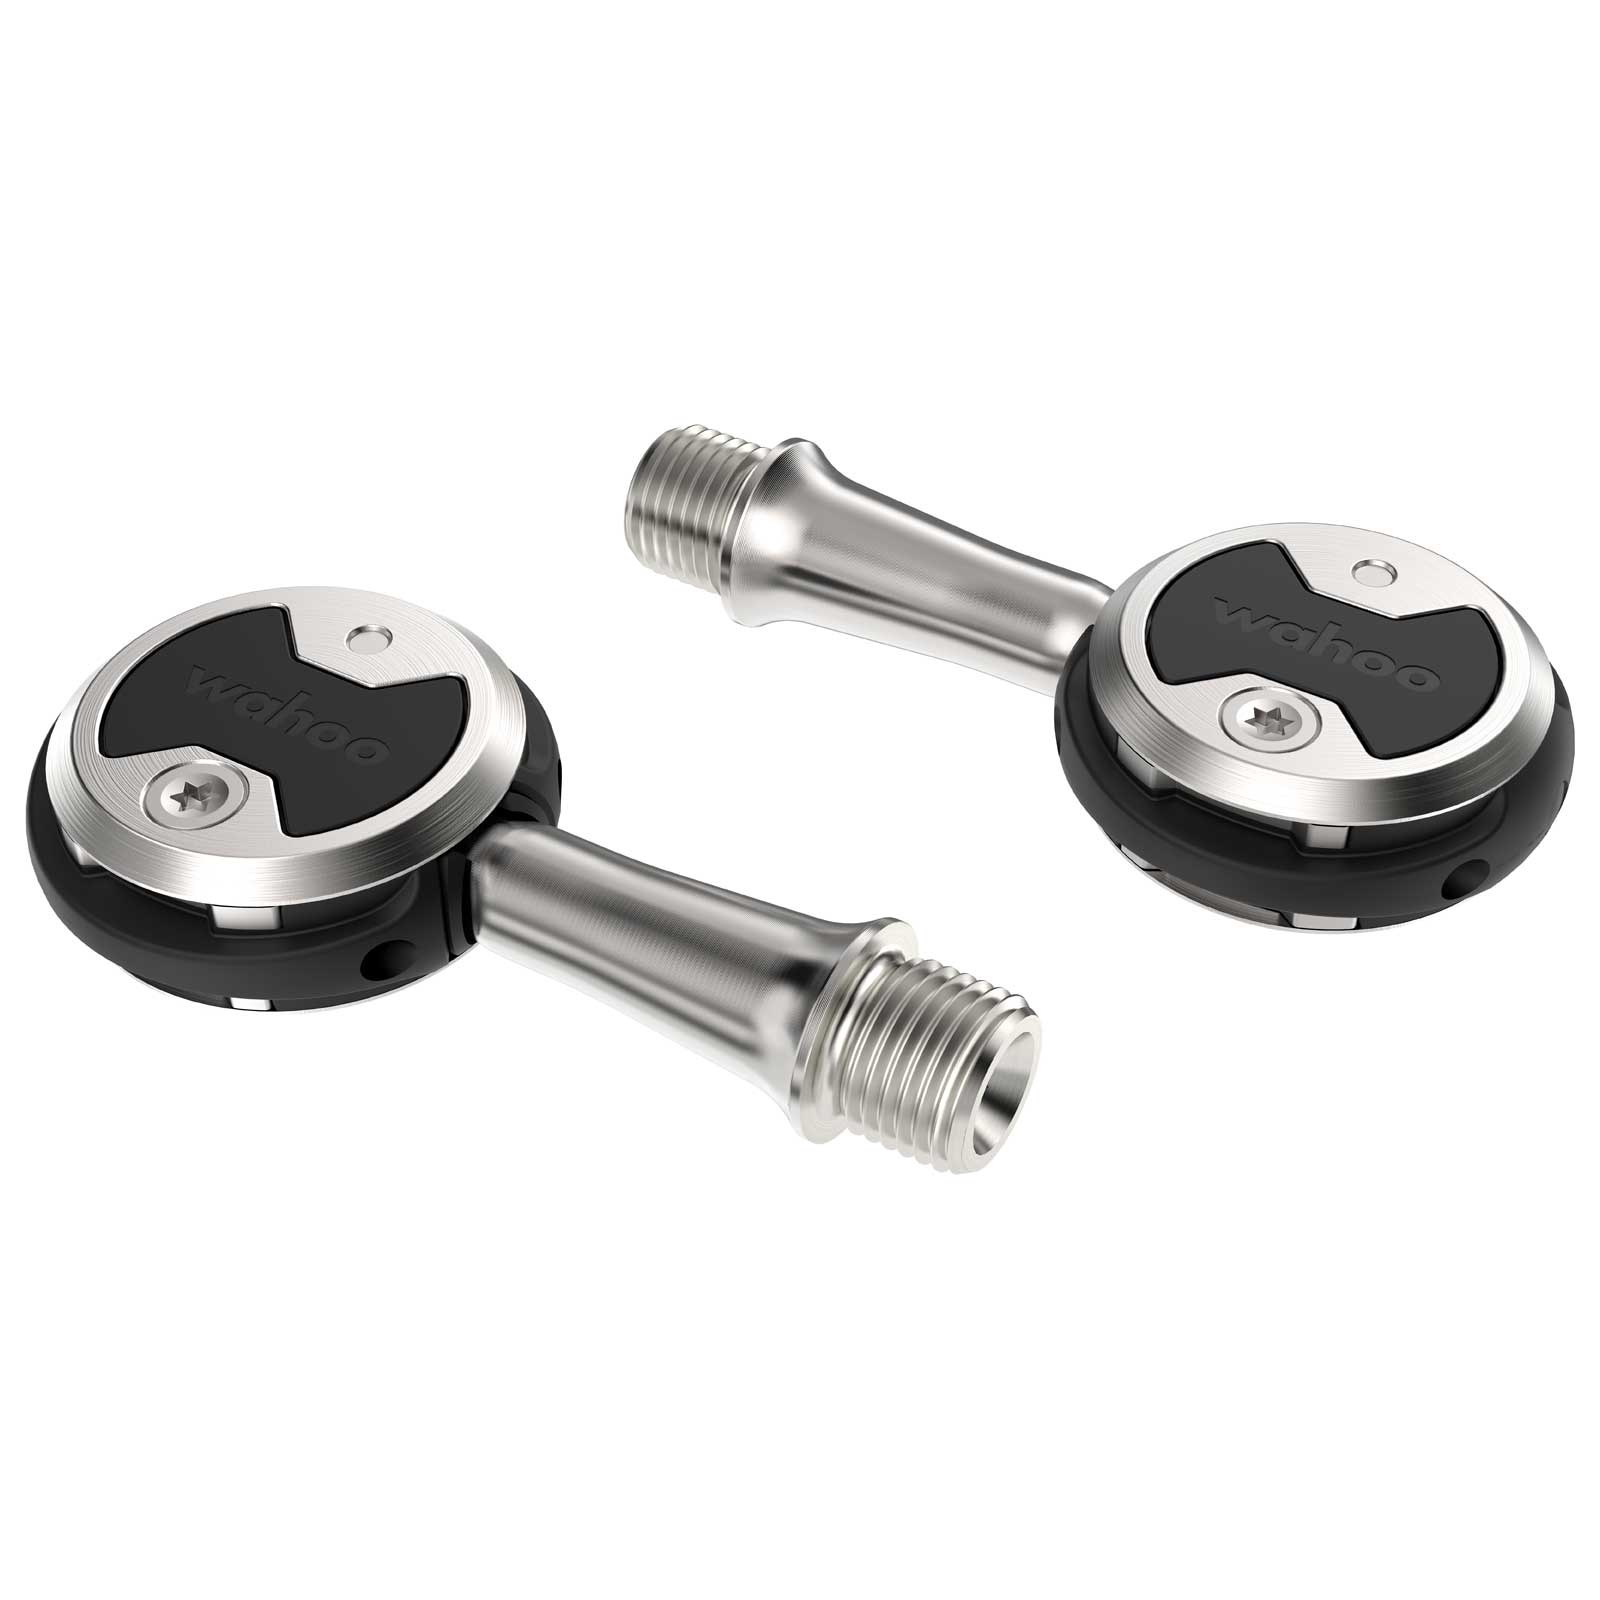 Picture of Wahoo SPEEDPLAY Zero Stainless Steel Pedals - black/silver